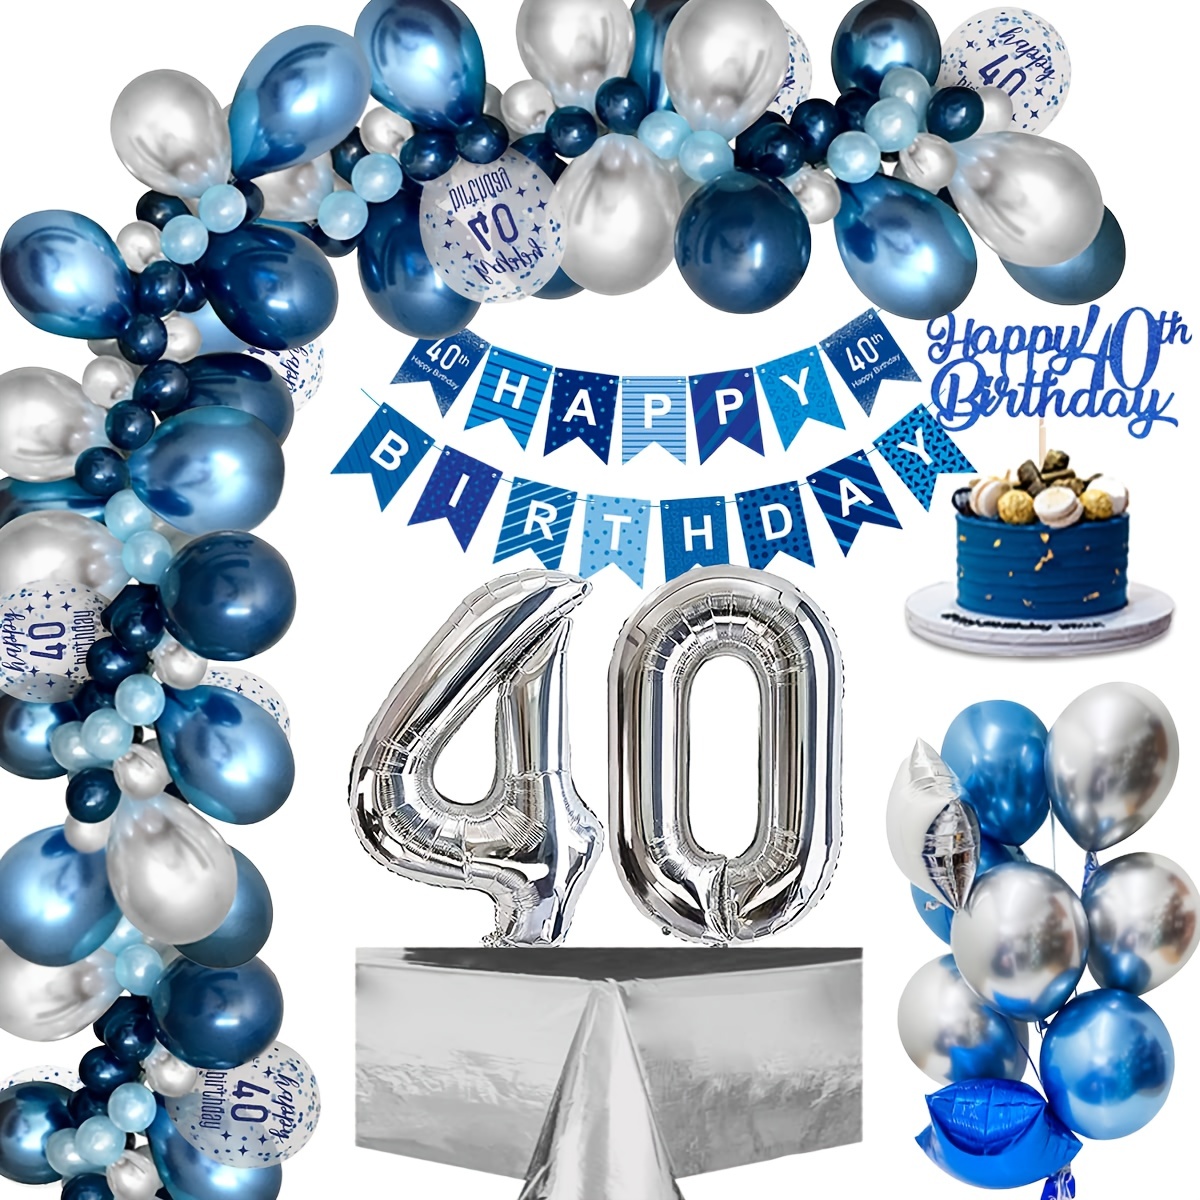 

40th Birthday Decoration, Balloons For 40th Birthday, Men With Blue/ Silvery Balloons, 40th Happy Set, Birthday Banner, Foil Balloon, 40th Confetti Balloon For Men And Women's Birthday Decorations